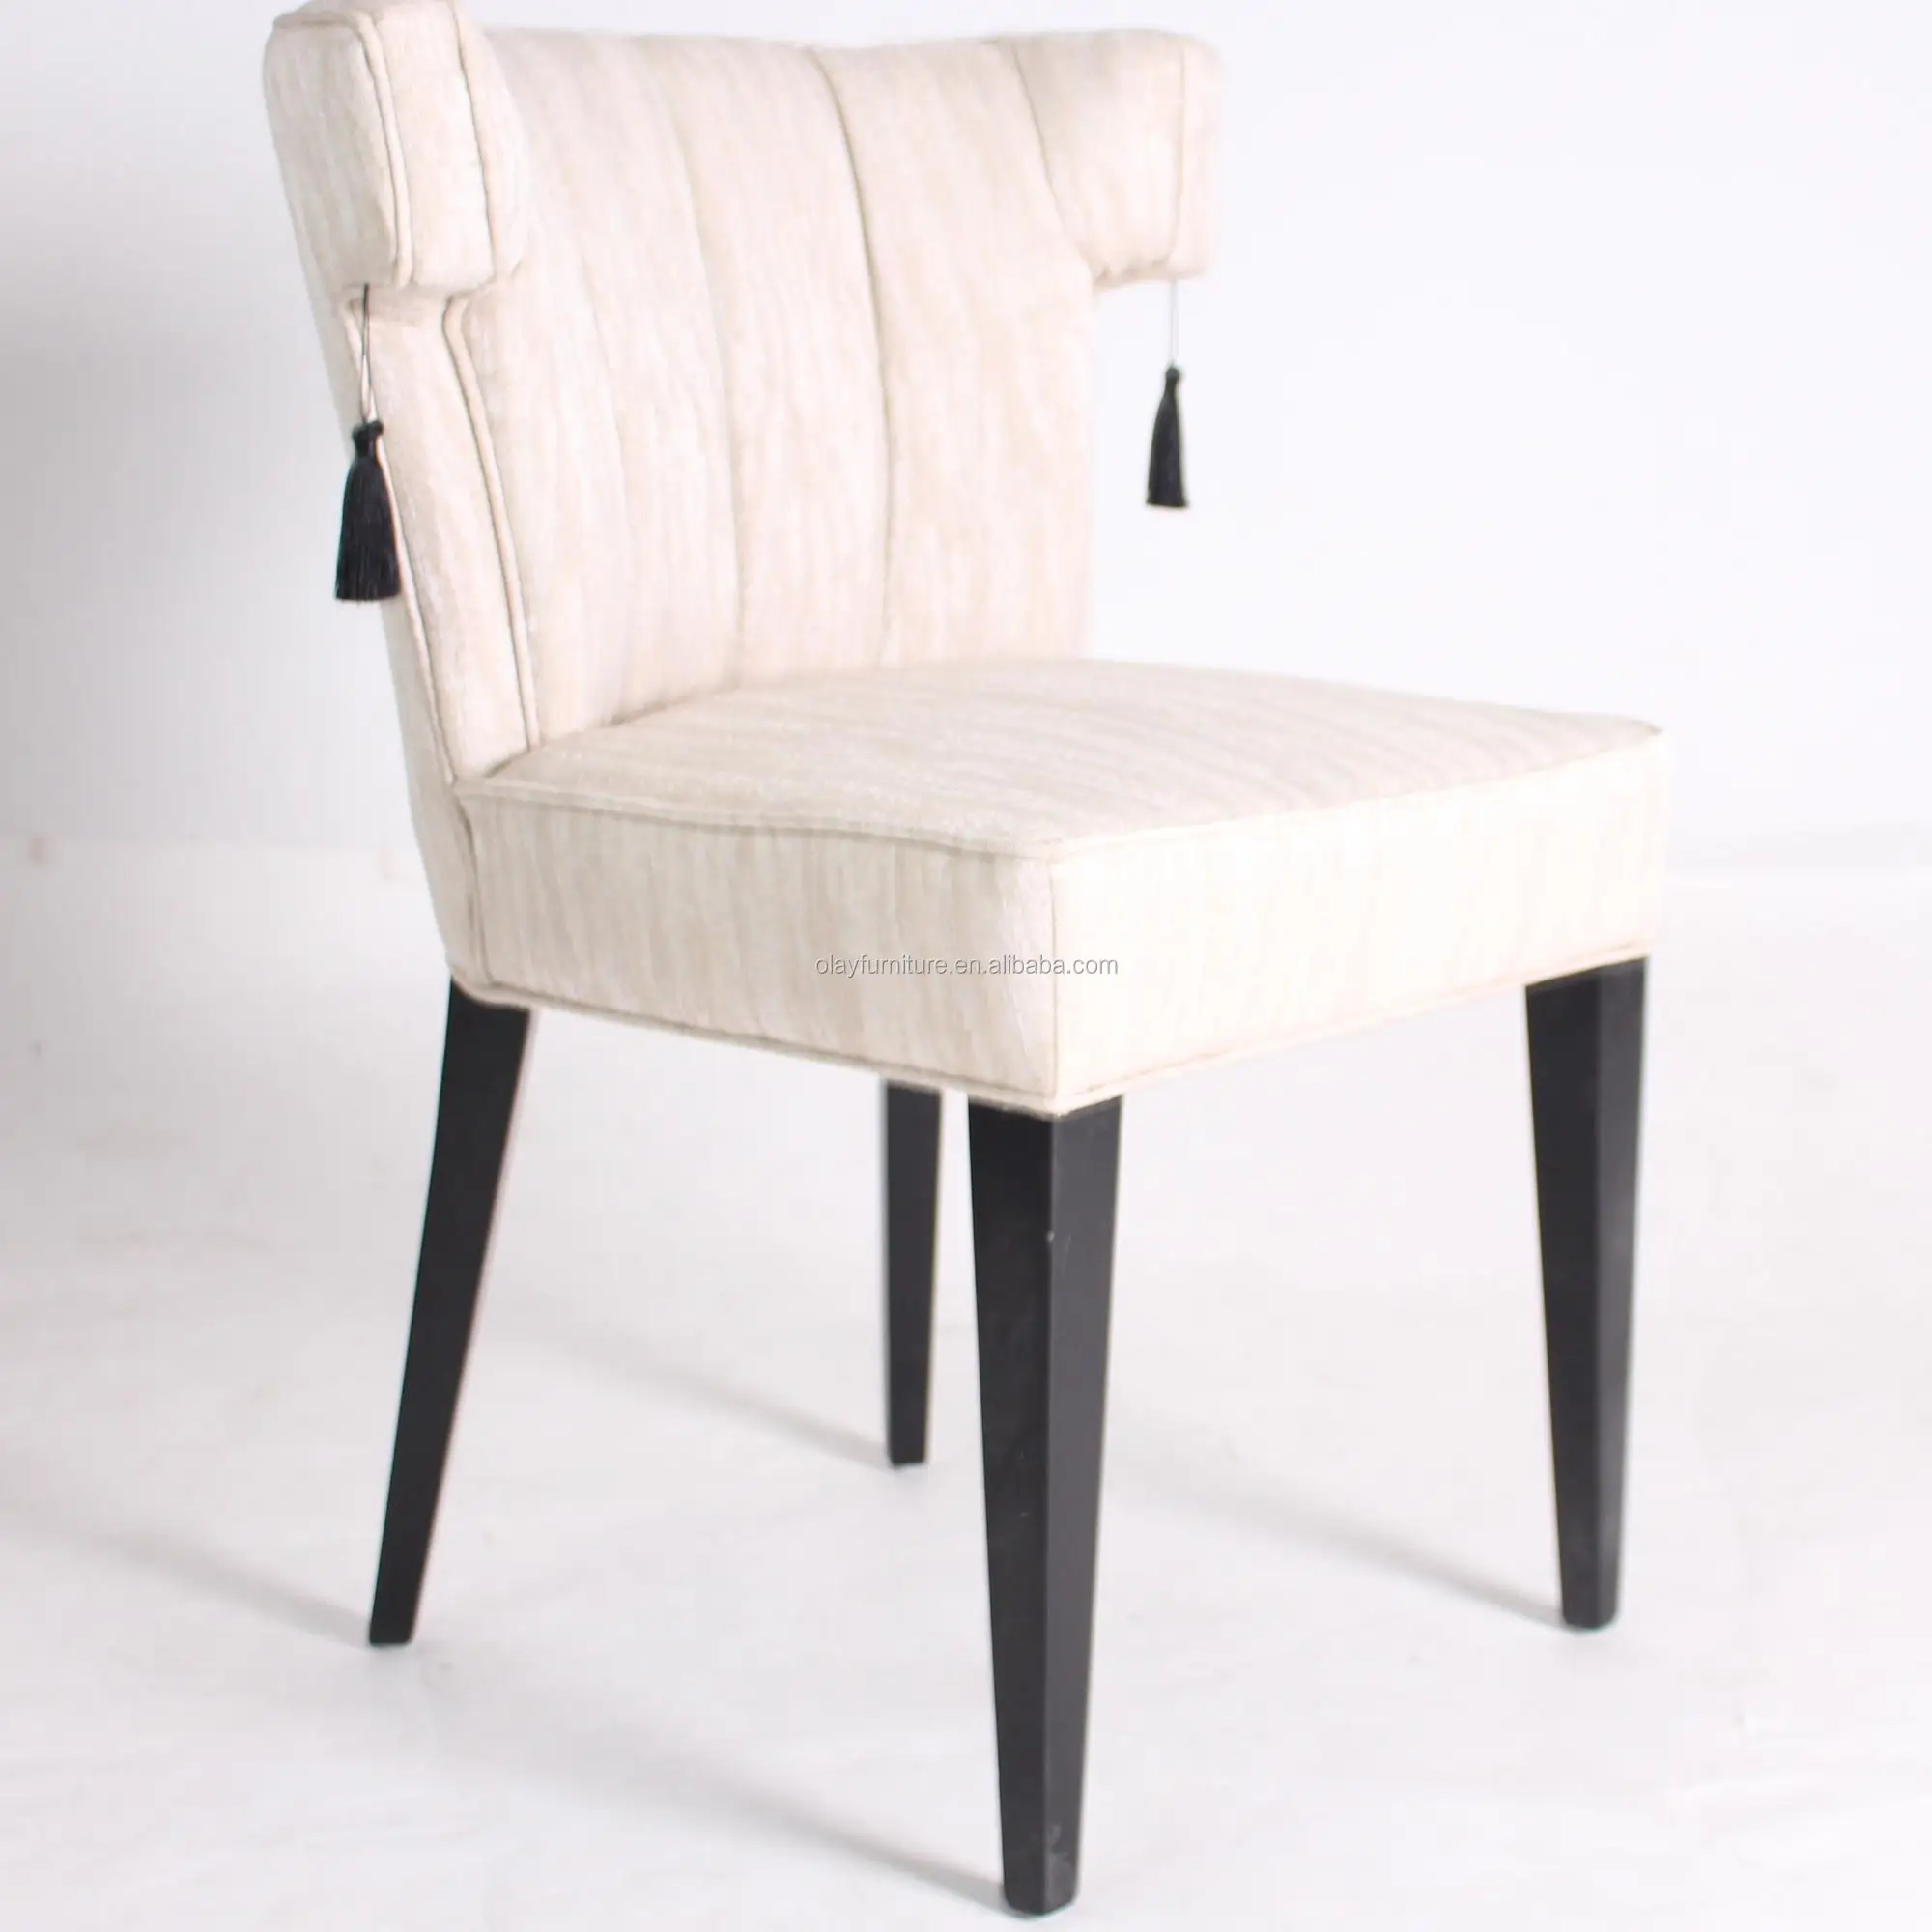 Dubai Designer Upholstery Furniture Luxury Dining Chair With Rental